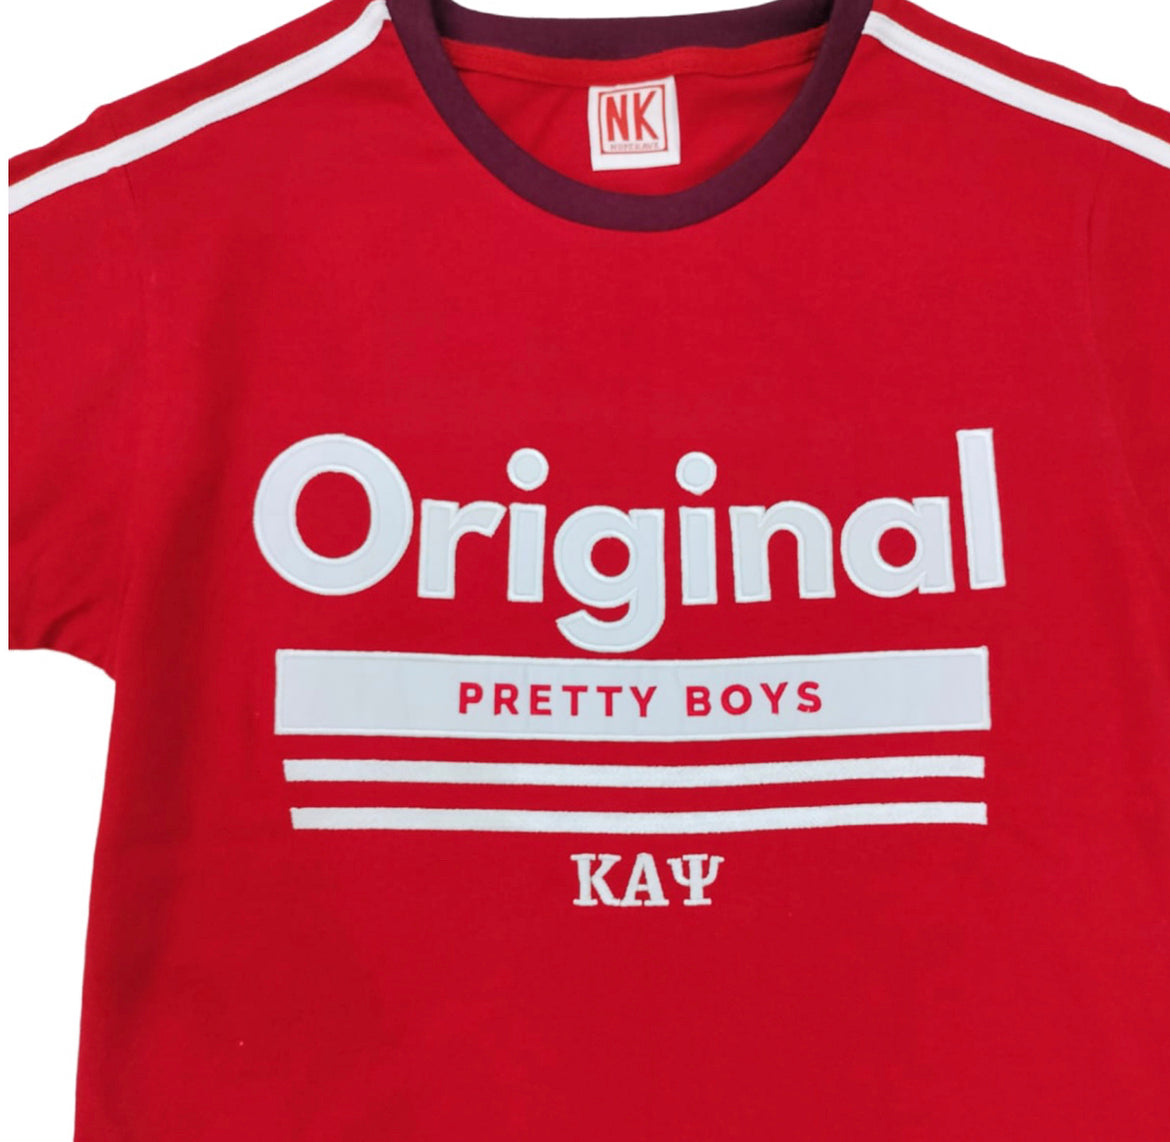 This original Kappa Alpha Psi T-shirt features beautifully embroidered details with the fraternity's iconic colors of red and white. Perfect for any member of the Fraternity, this shirt is a must-have collectible for those who appreciate historical memorabilia.